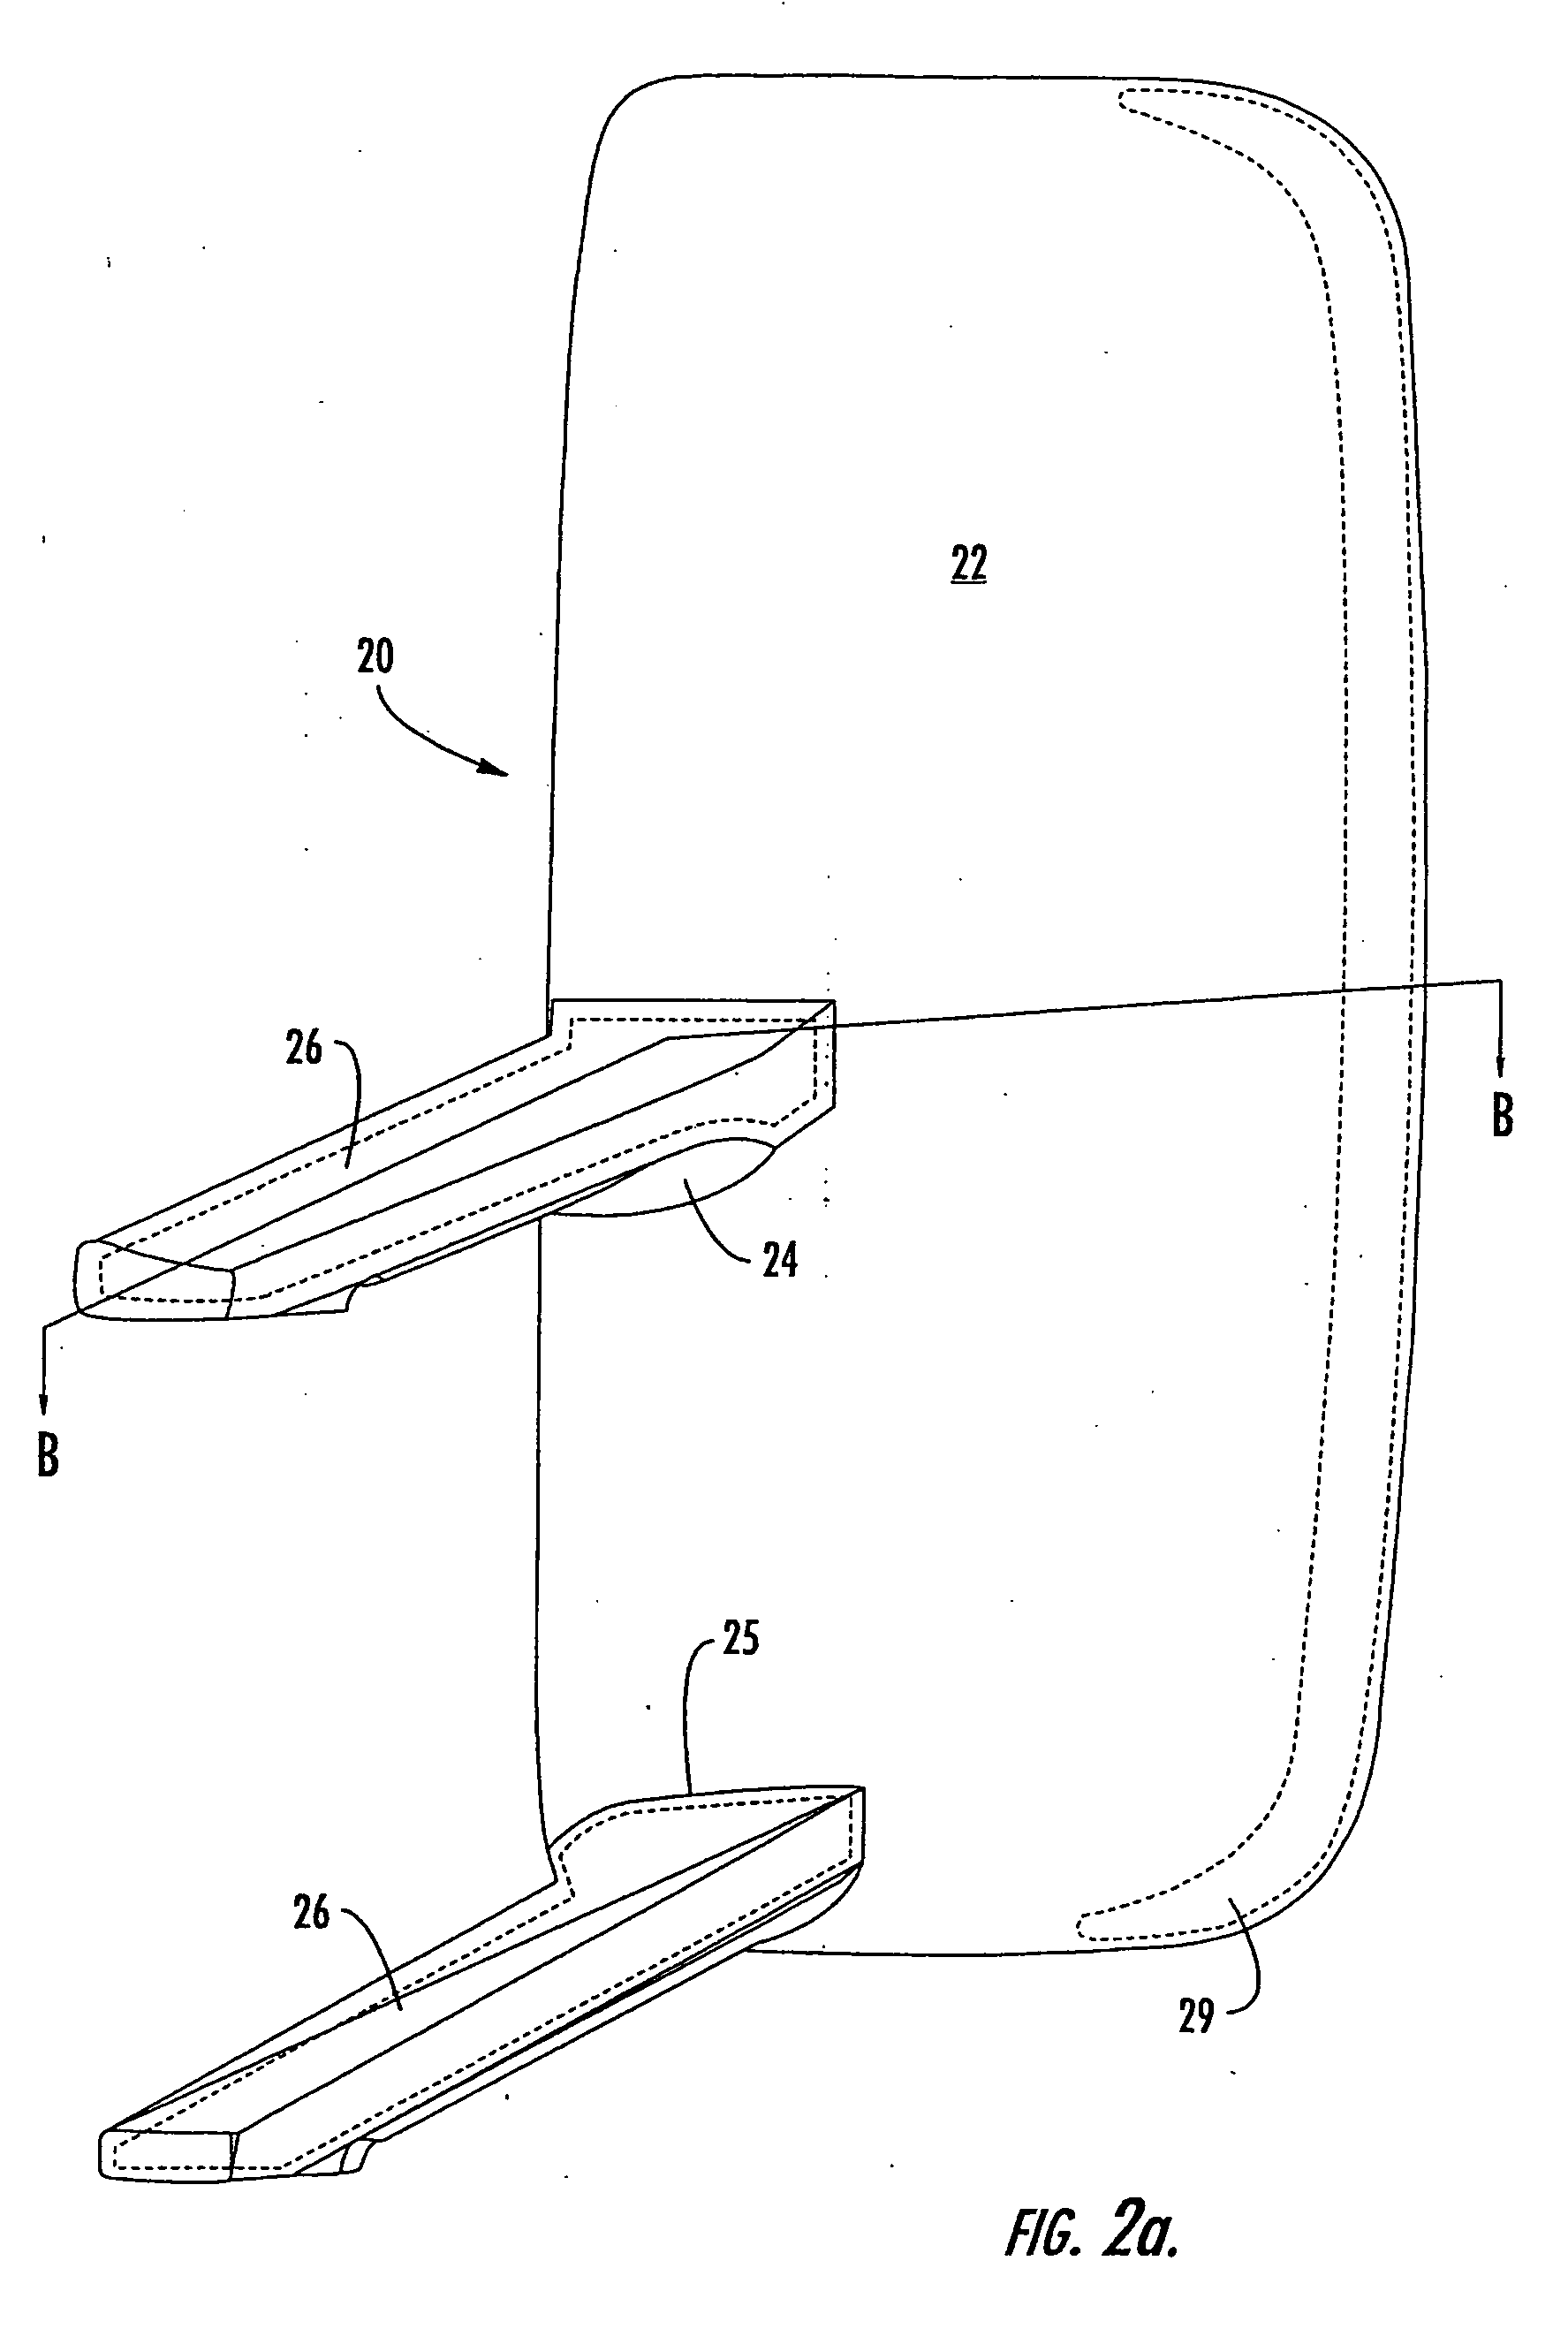 Fillable and stiffened rearview mirror assembly